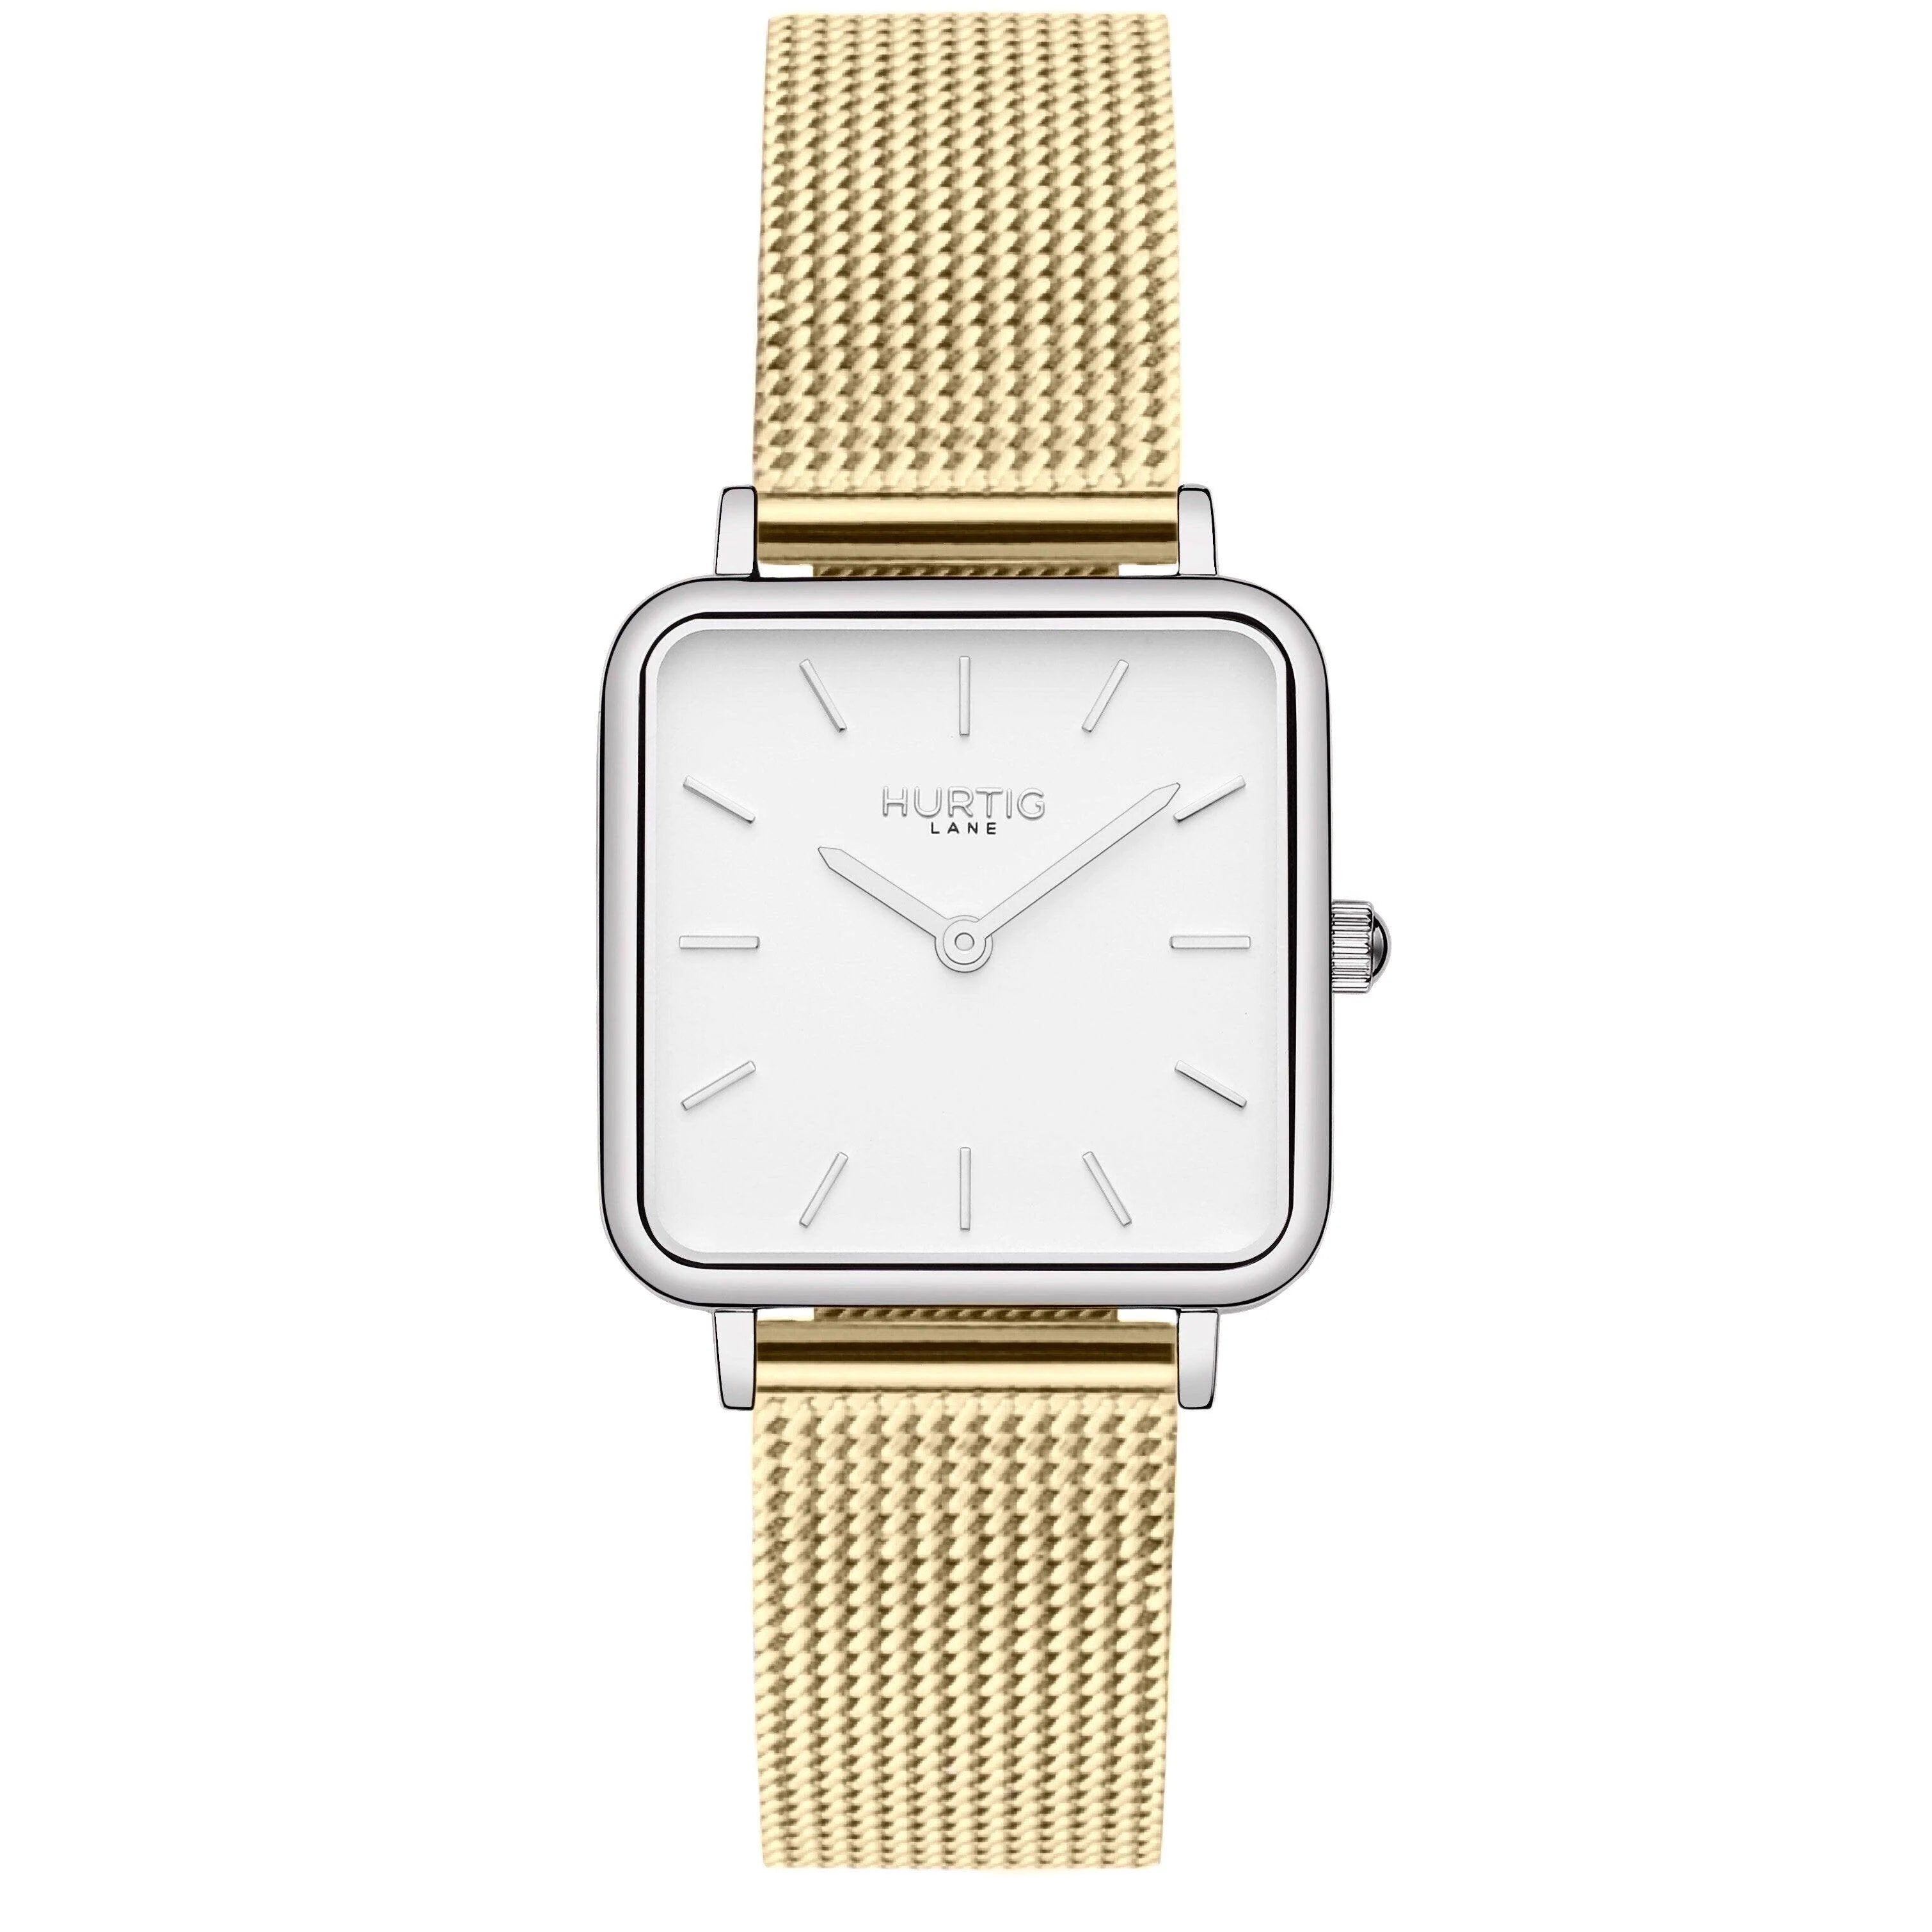 Neliö Square Stainless Steel Watch Silver, White & Gold